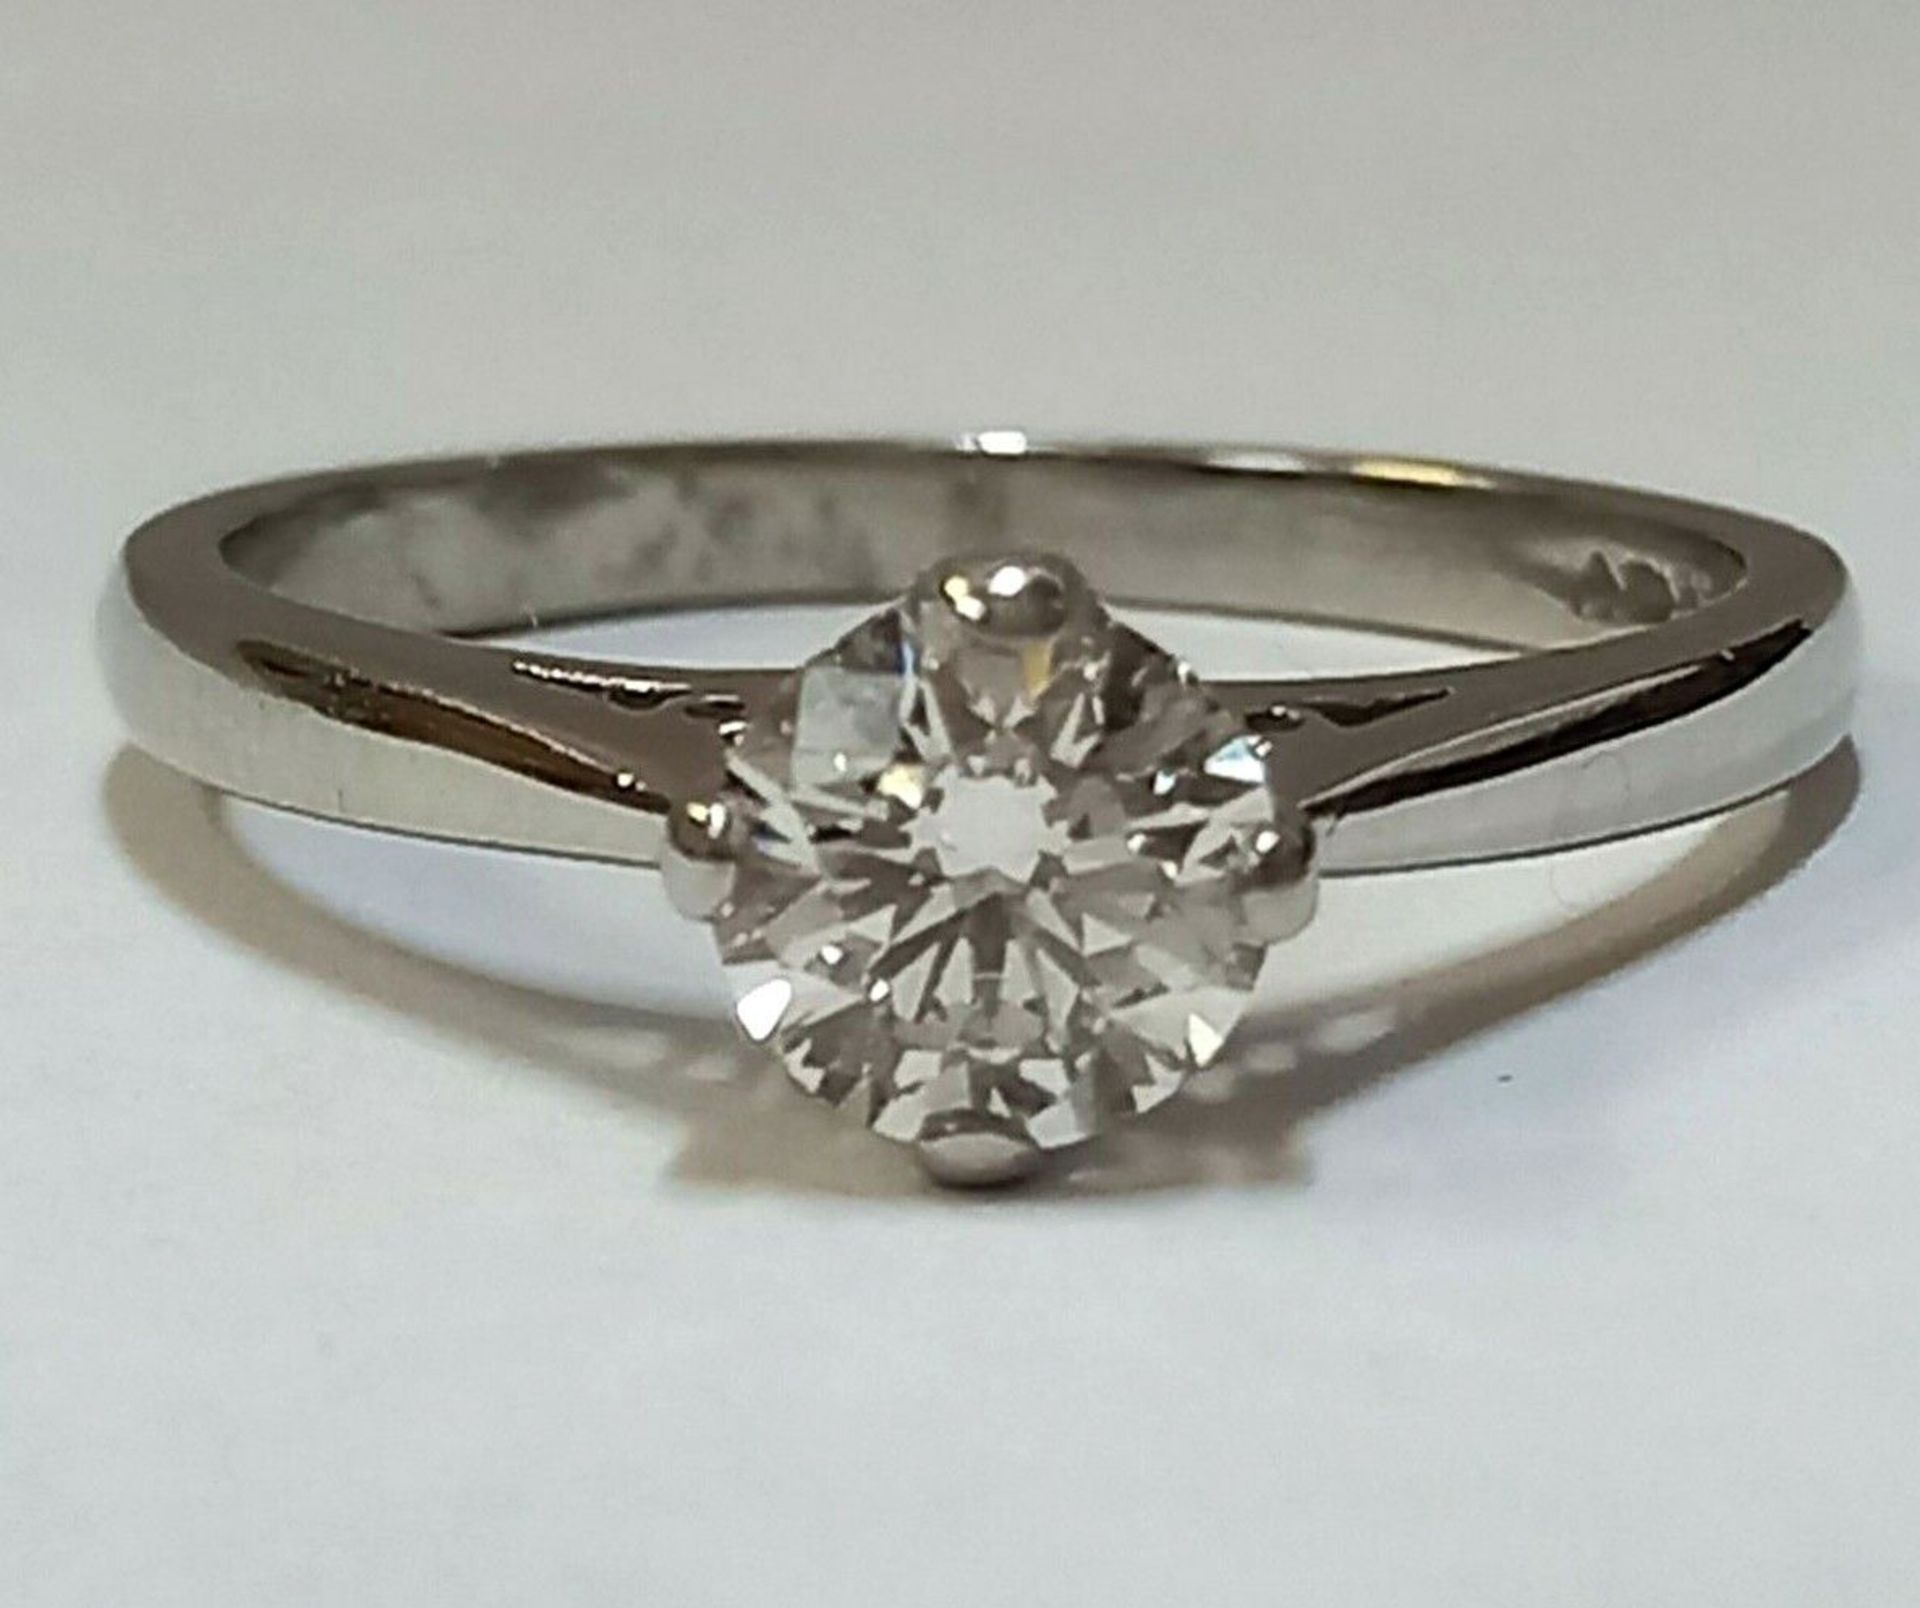 0.72 DIAMOND PLATINUM SOLITAIRE ENGAGEMENT RING/WHITE GOLD + GIFT BOX + VALUATION CERT OF £3795 - Image 4 of 8